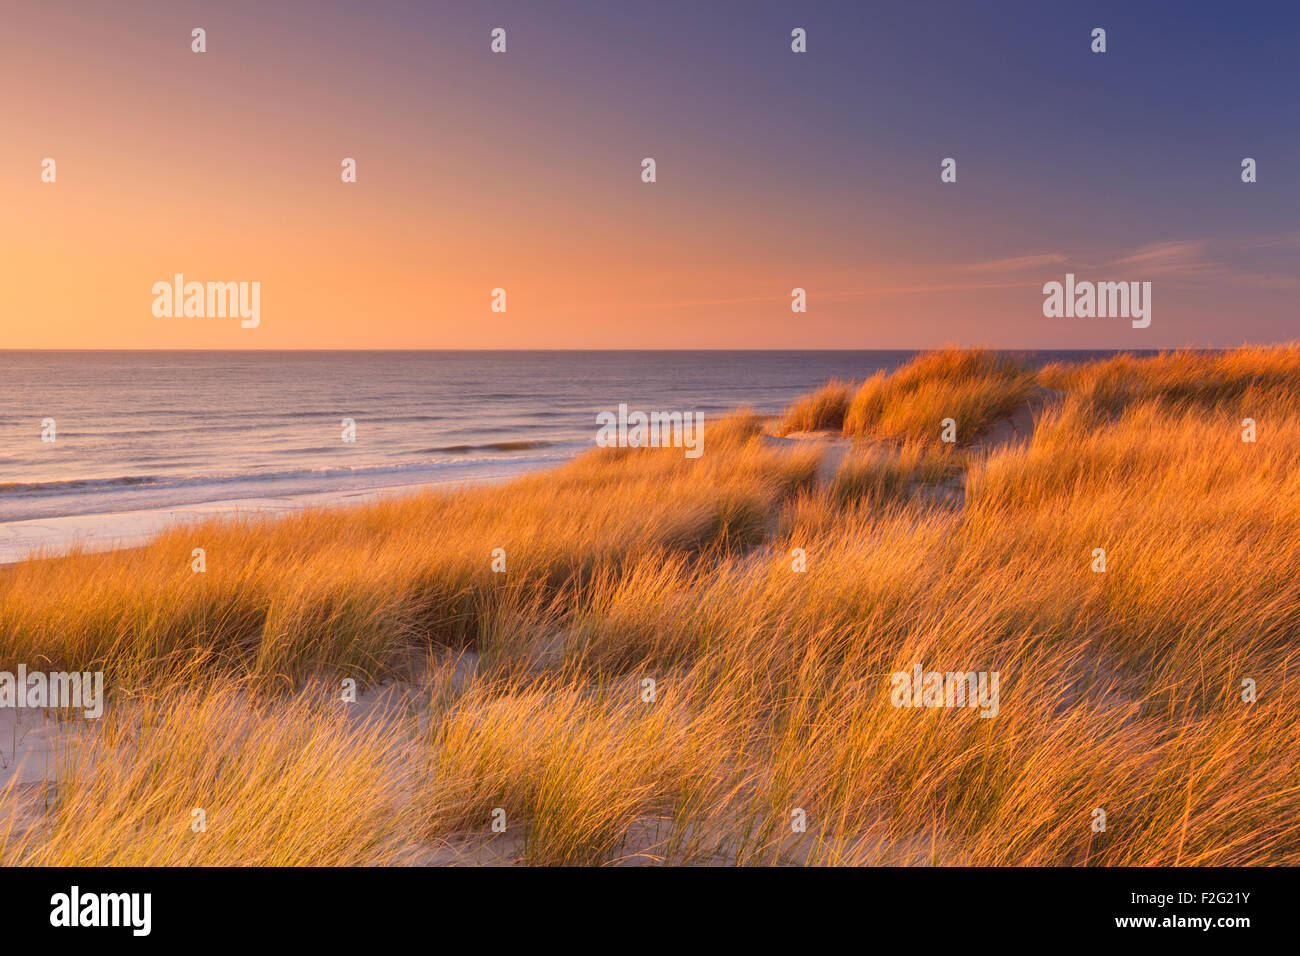 Tall dunes with dune grass and a wide beach below. Photographed at sunset on the island of Texel in The Netherlands. Stock Photo